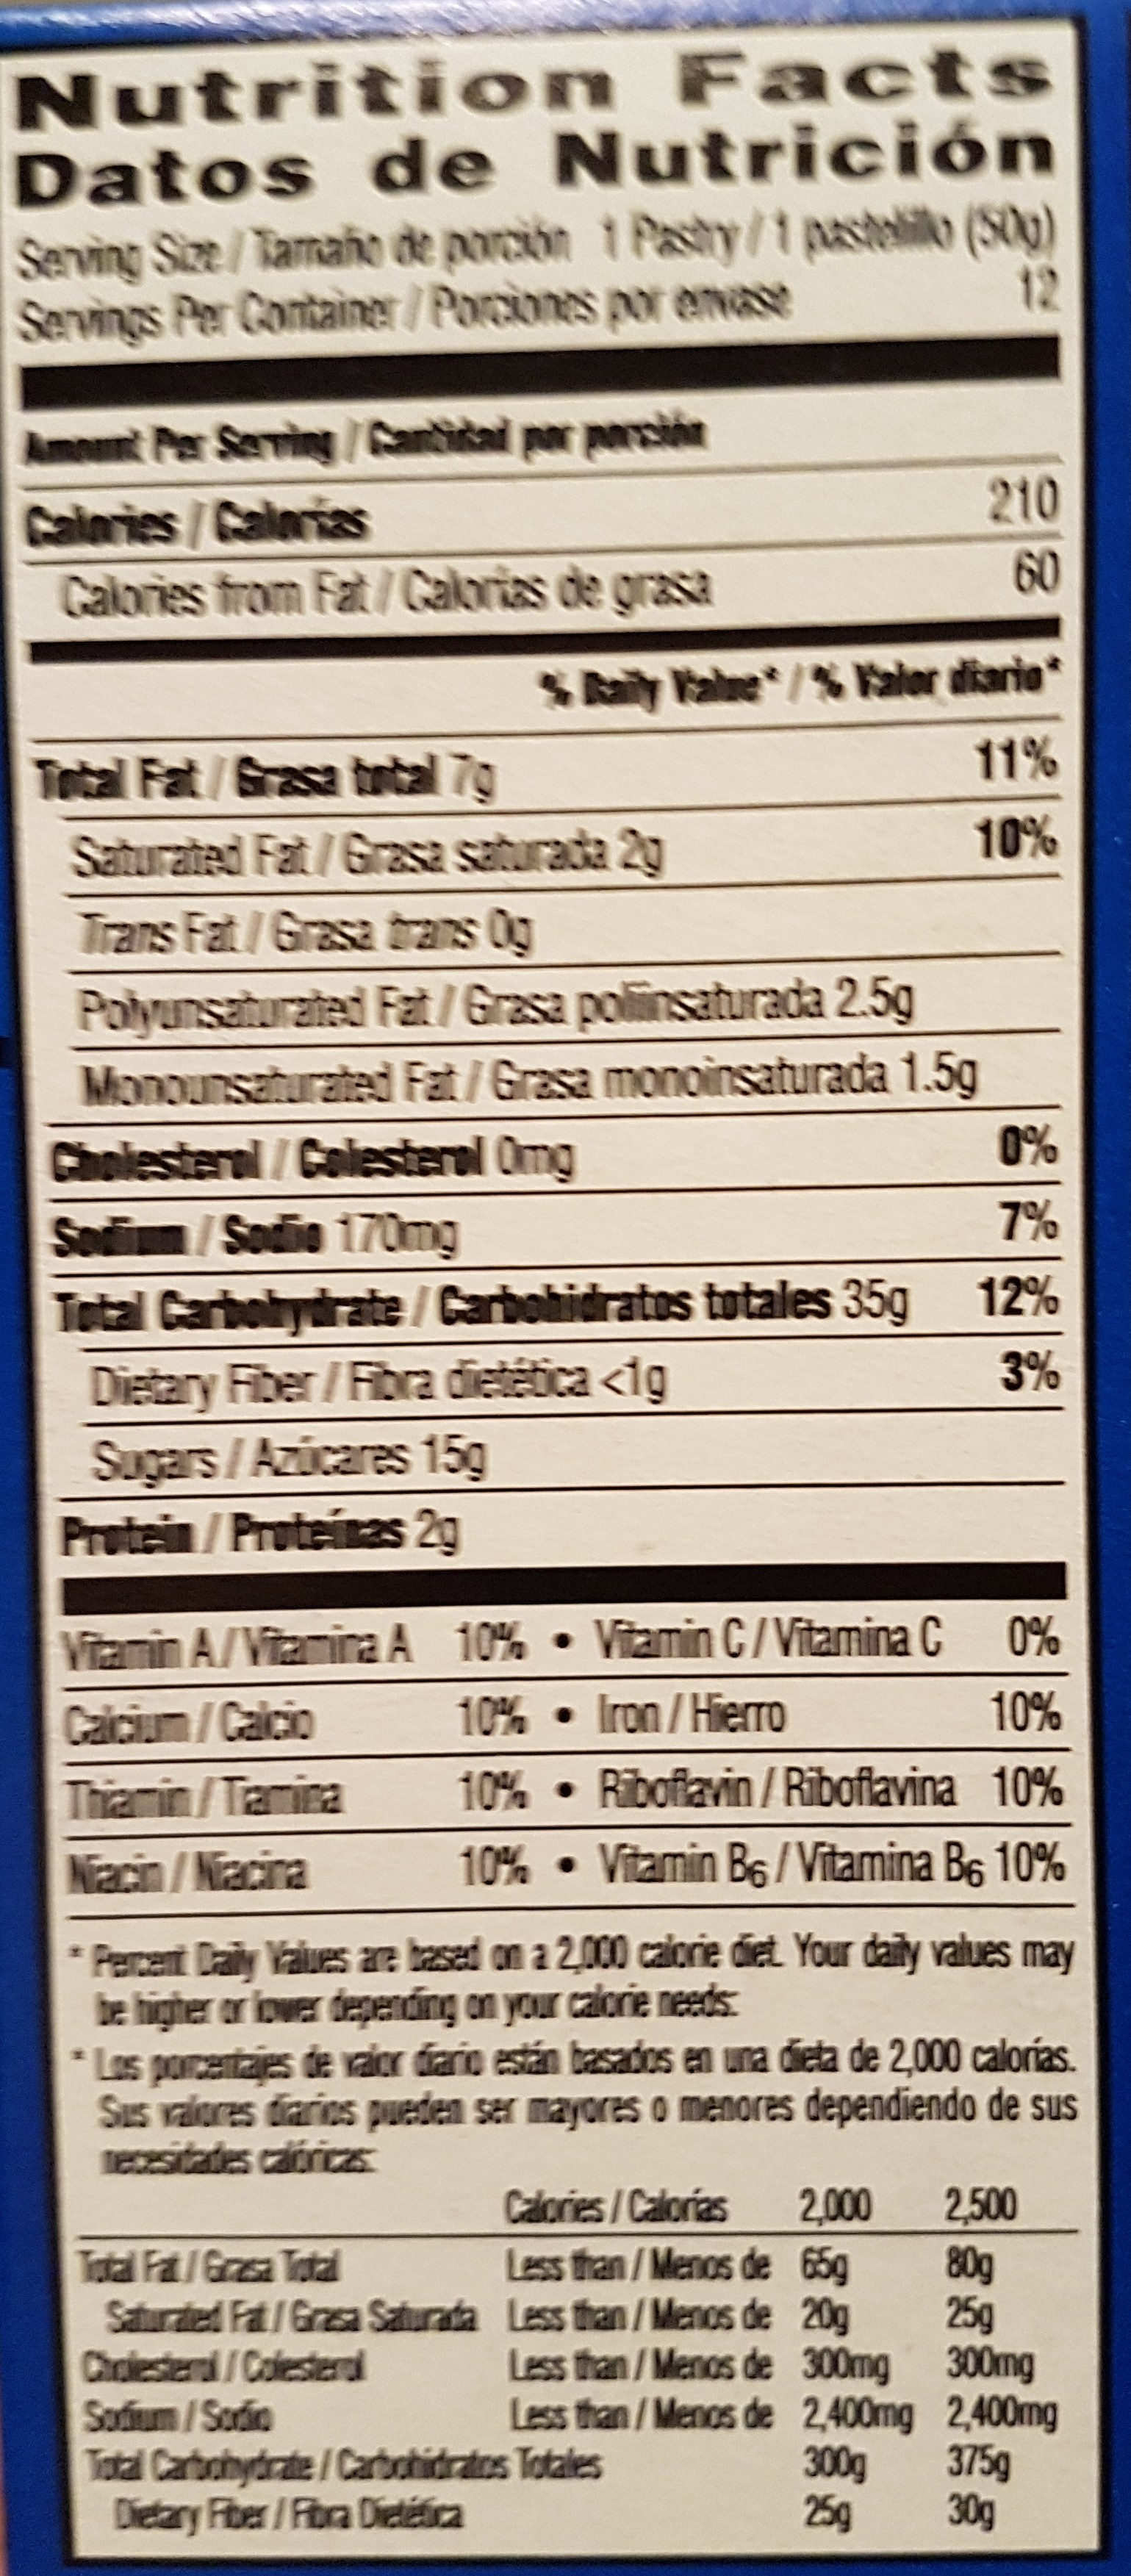 Frosted brown sugar cinnamon toaster pastries, brown sugar cinnamon - Nutrition facts